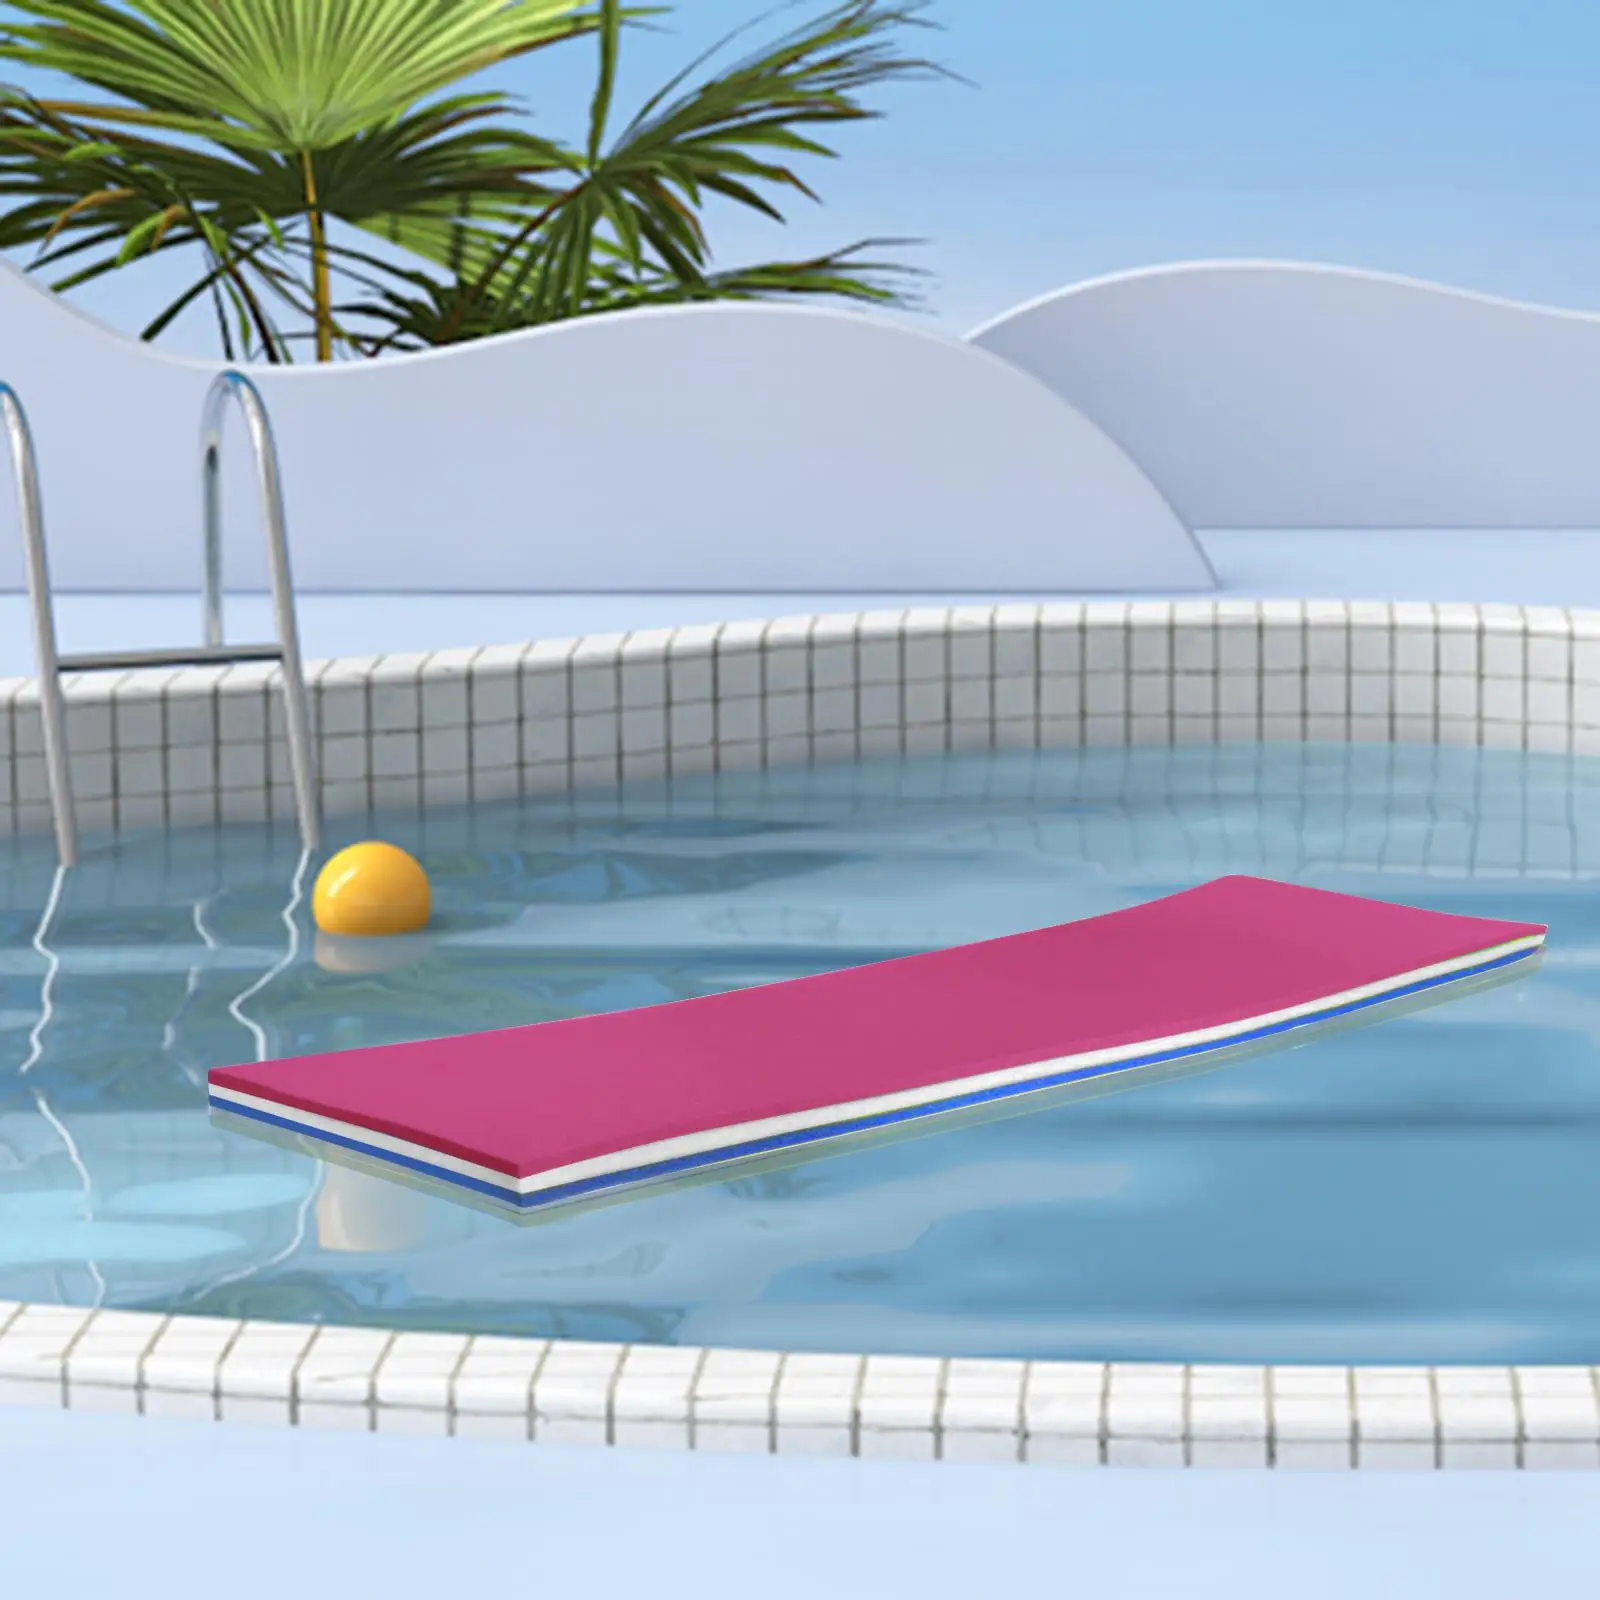 Floating Mat Pad Cushion 3 Layer 43x15.7x1.3Inches for Water Parks, Pools, Lakes, Beaches and Sea Portable Roll up Pad